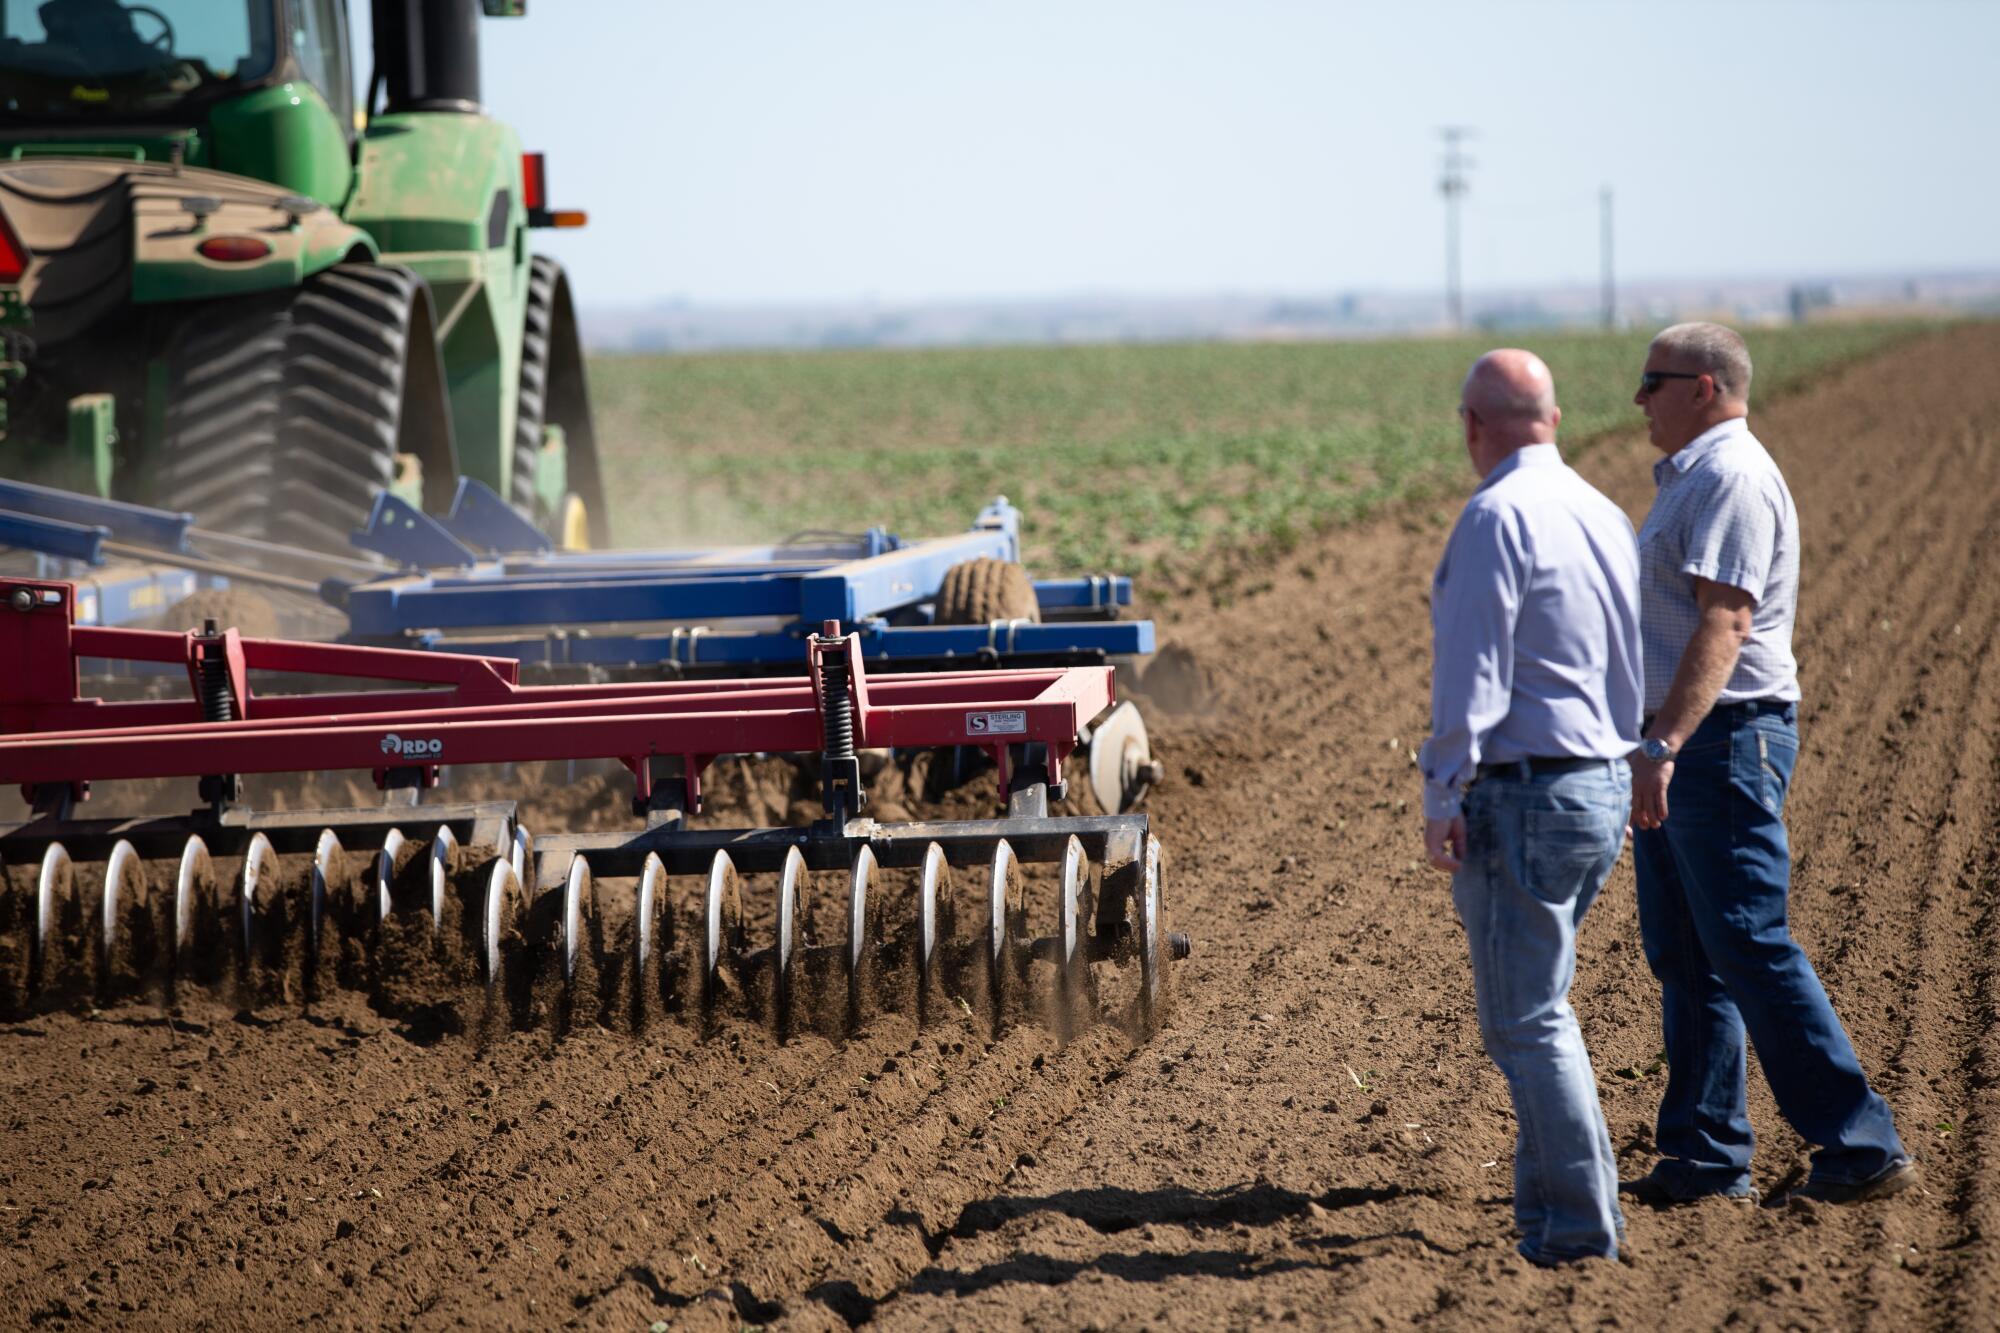 Dale Lathim, left, executive director of the Potato Growers of Washington, and farmer Mike Pink watch as 300 acres of Ranger potatoes are plowed up in a field in Eltopia, Wash.